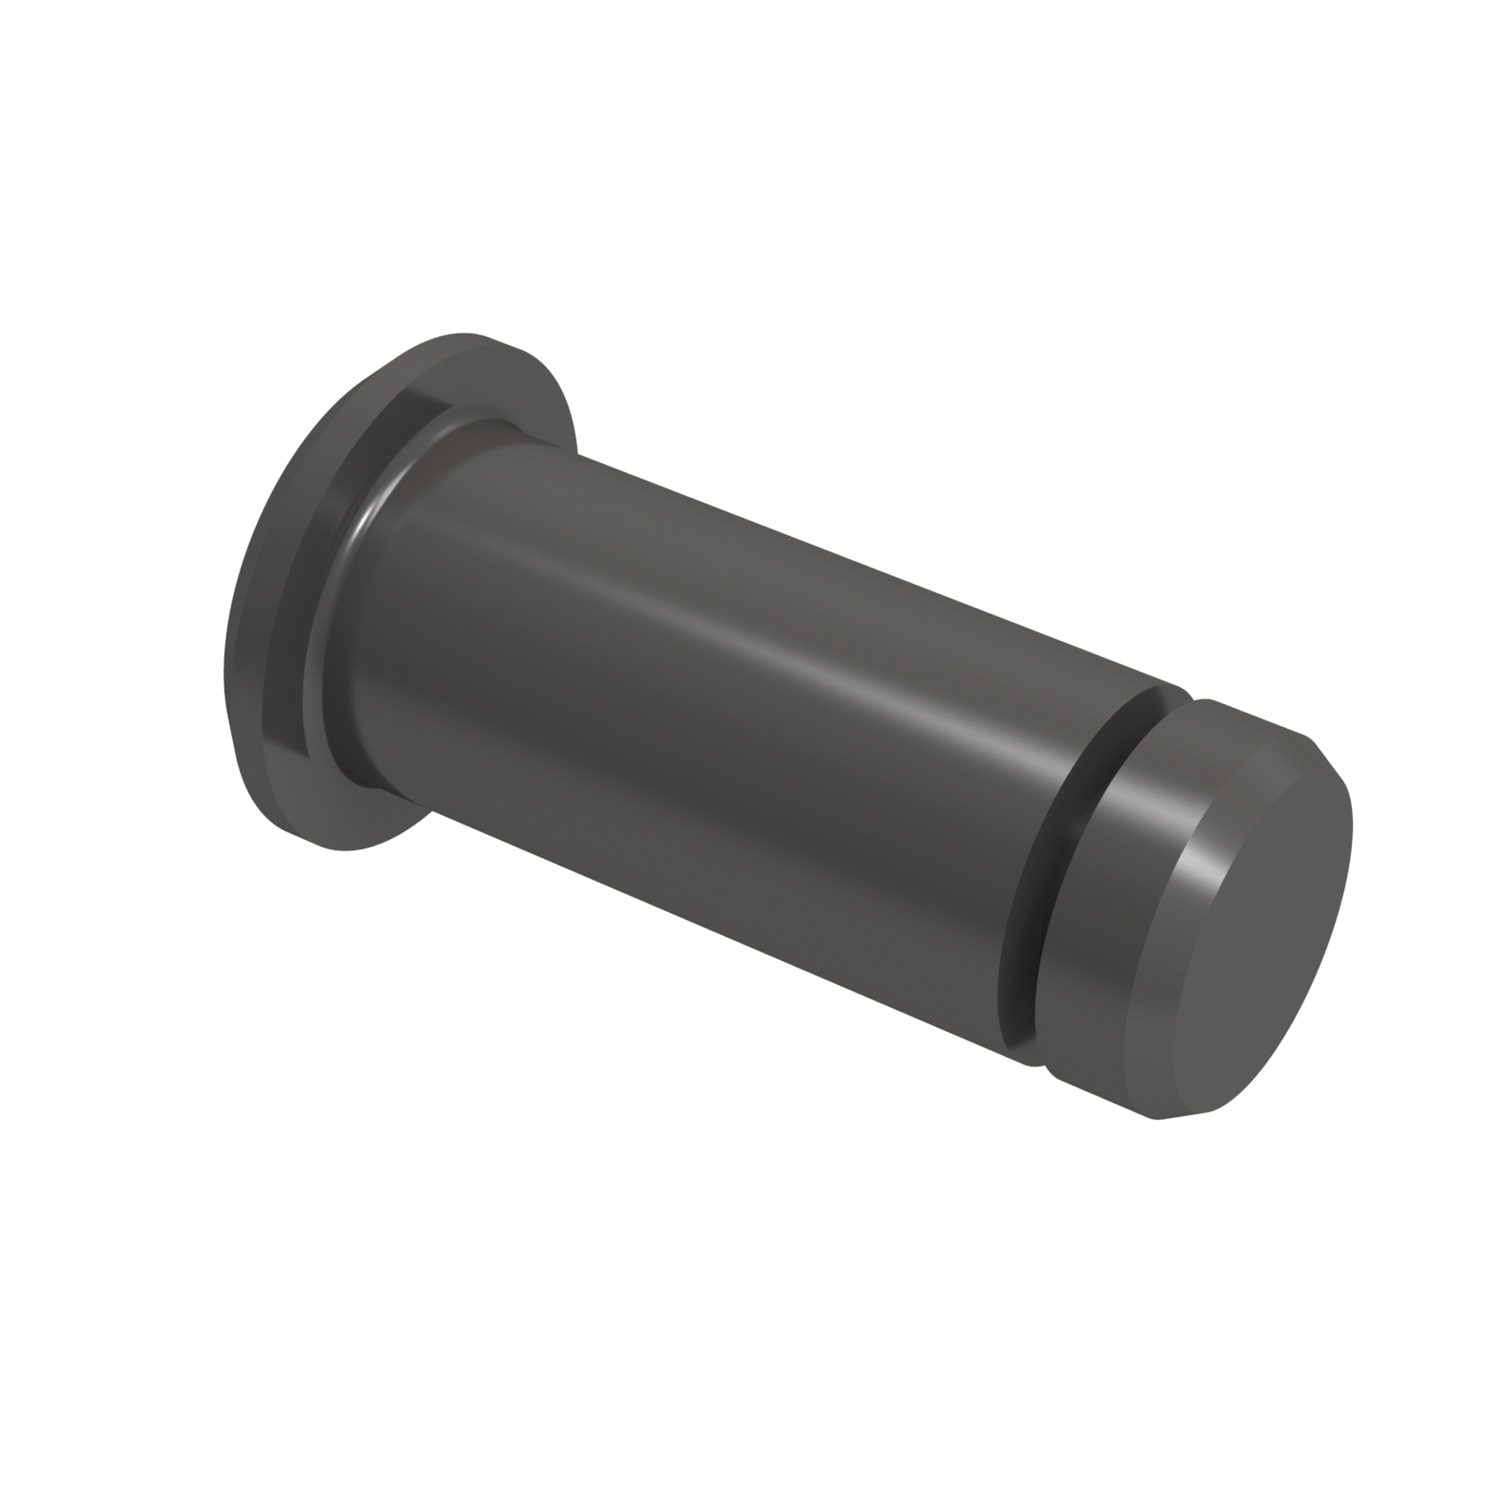 Plastic Clevis Pin Made from black plastic (Igumid G), for use with R3409 clevis joints.